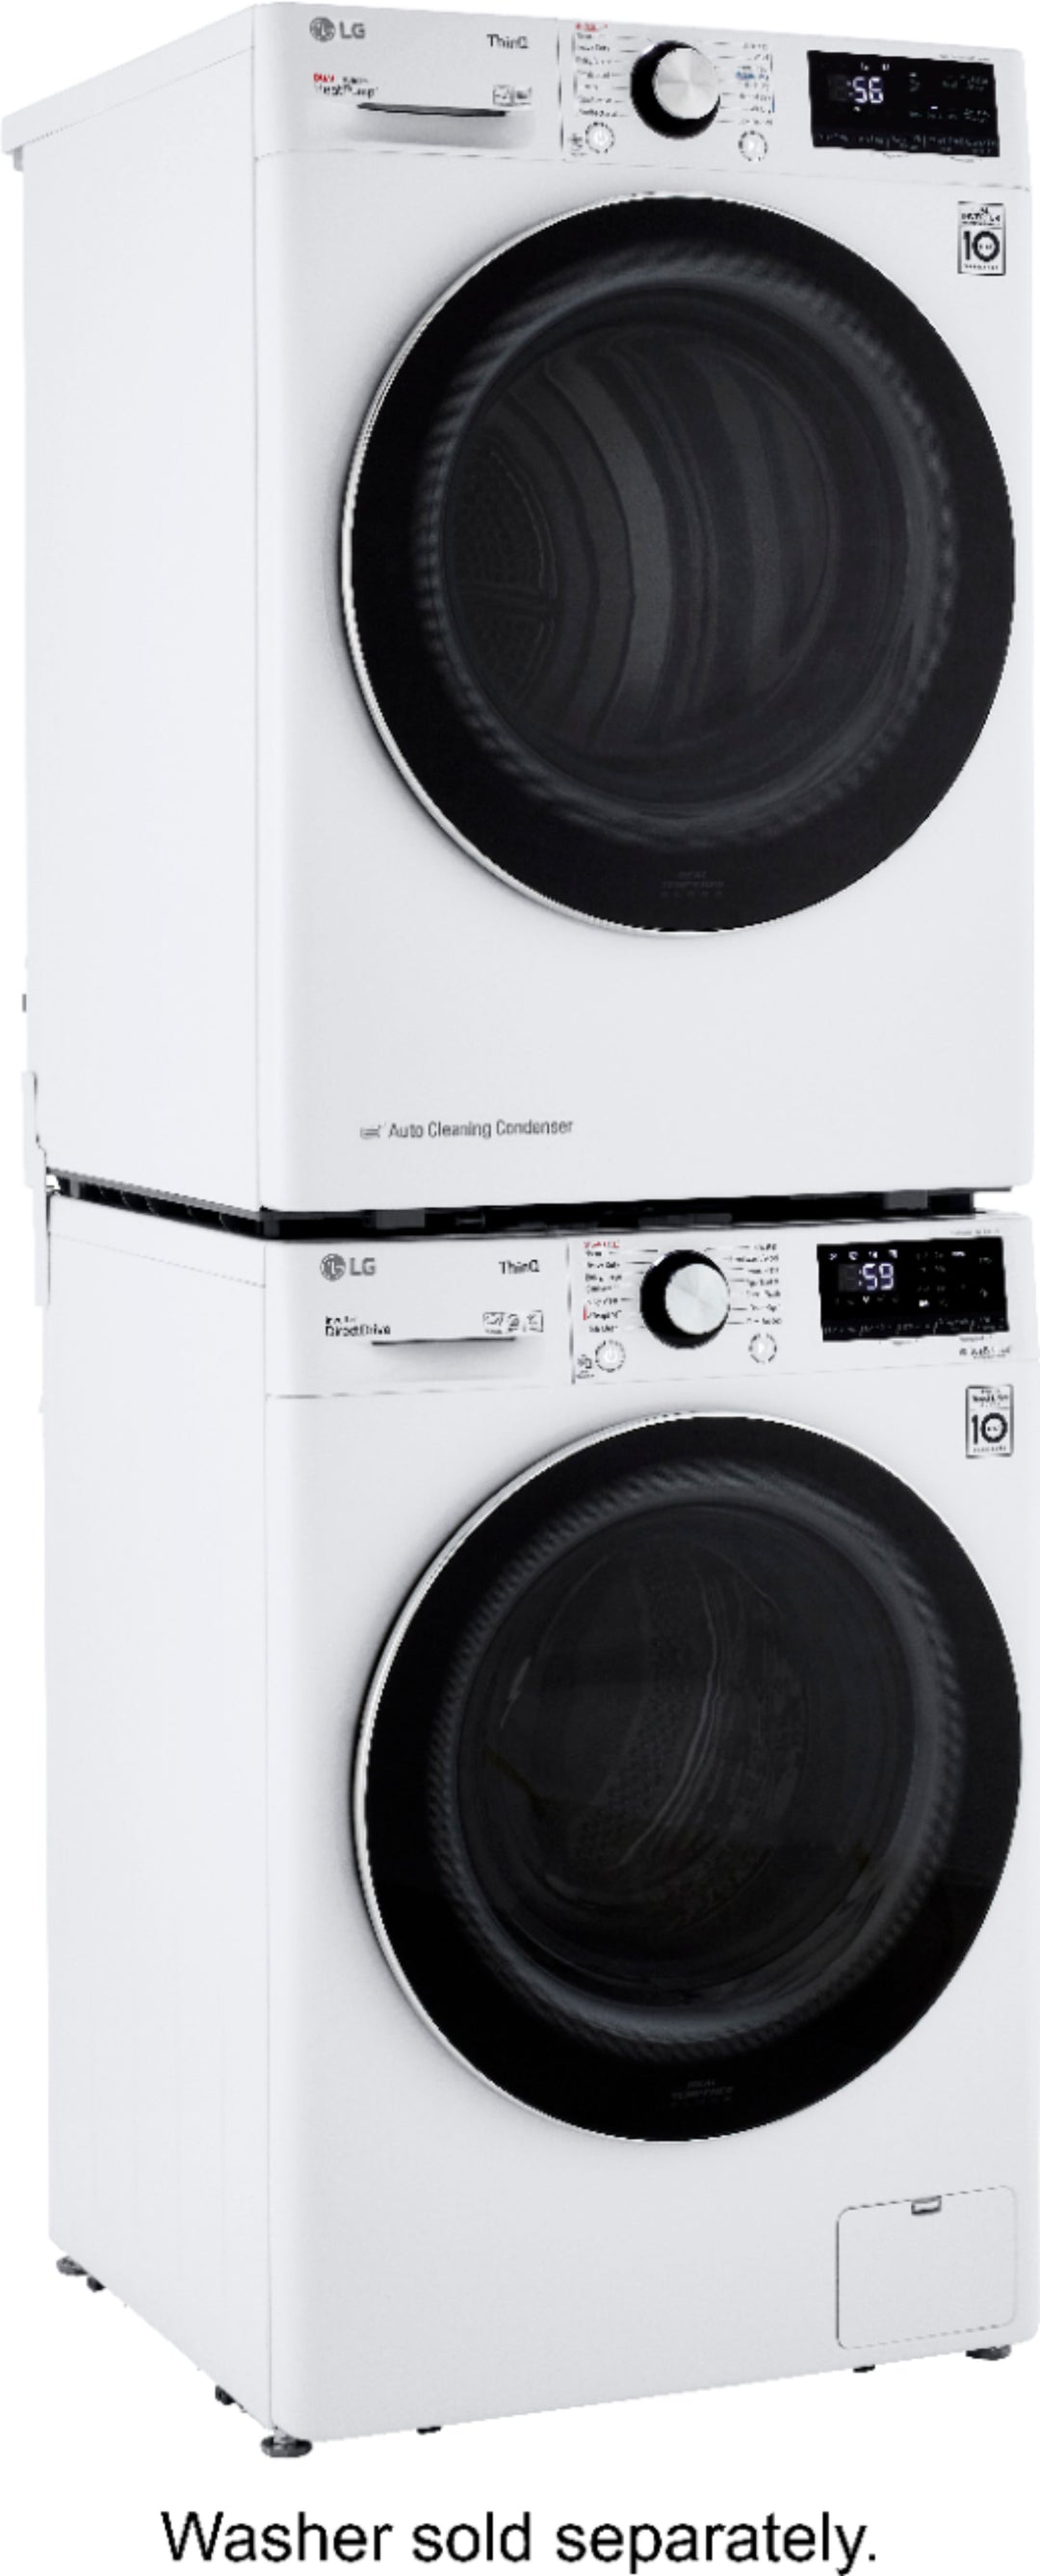 LG - 4.2 cu ft Stackable Electric Dryer with Dual Inverter HeatPump - White_2